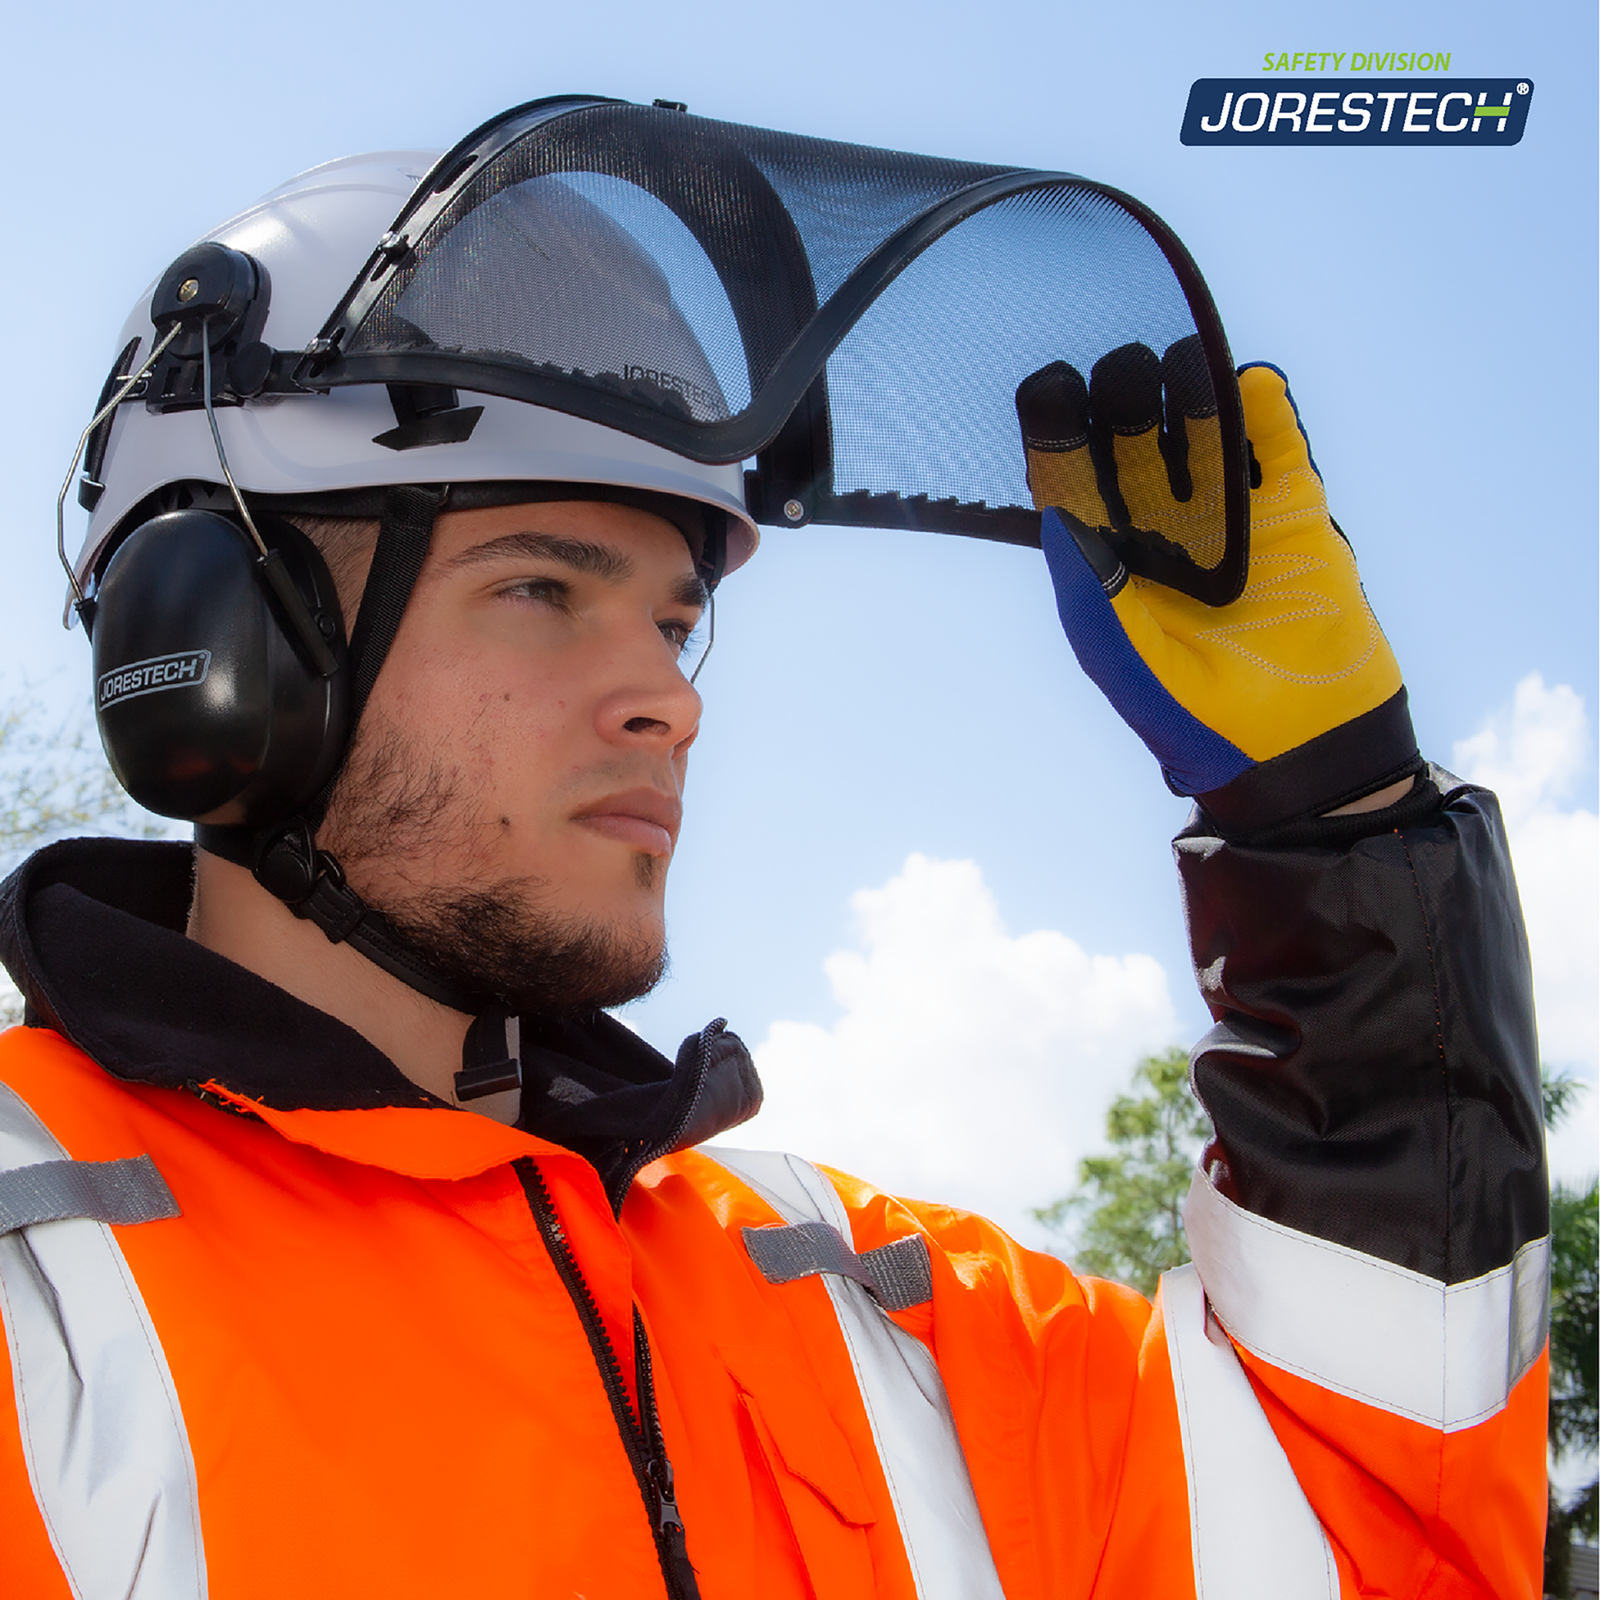 A man wearing the white jorestech ventilated safety hard hat with chin strap, the iron mesh face shield and earmuff attachments. He is pulling the face shield up showing how it pivots easily out of the way